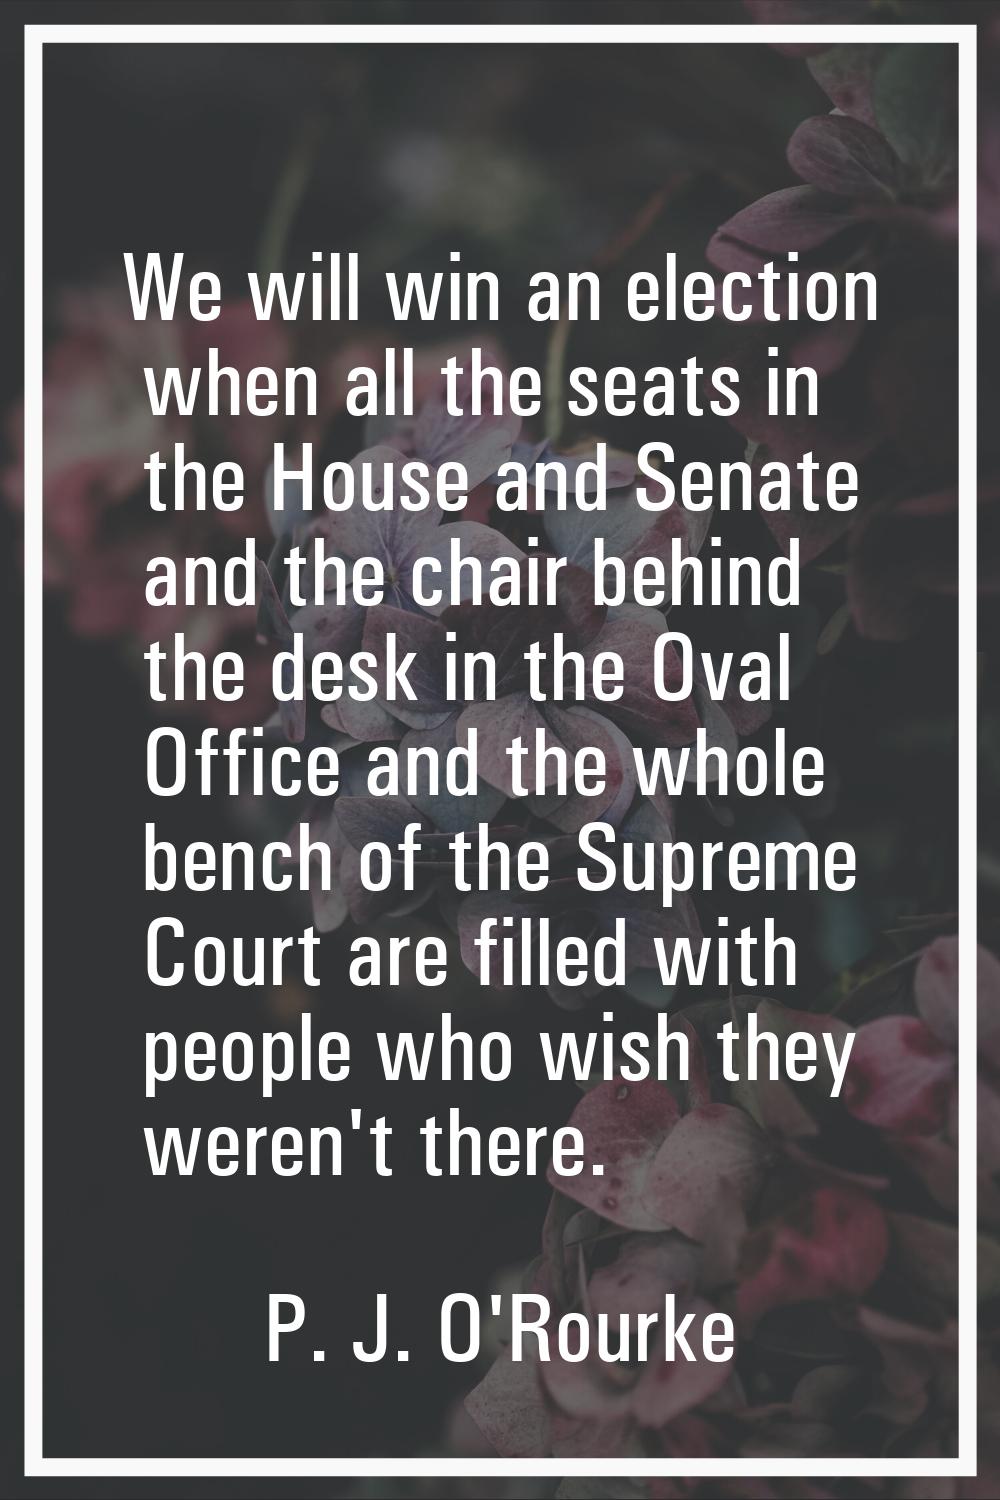 We will win an election when all the seats in the House and Senate and the chair behind the desk in